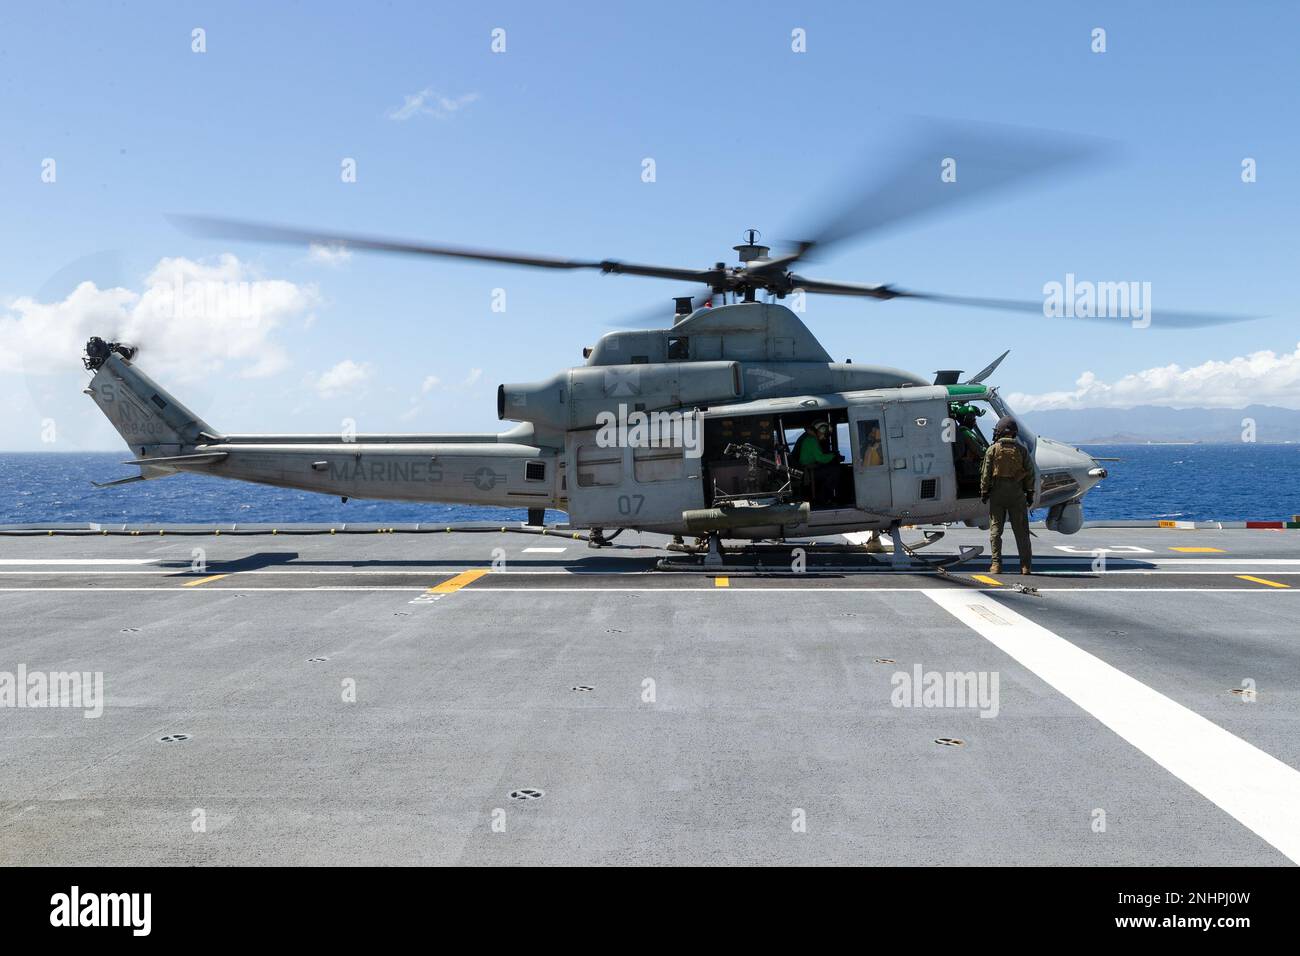 PACIFIC OCEAN (Aug. 1, 2022) A U.S. Marine Corps UH-1Y Venom helicopter refuels on the flight deck of Royal Australian Navy Canberra-class landing helicopter dock HMAS Canberra (L02)   during Rim of the Pacific (RIMPAC) 2022. Twenty-six nations, 38 ships, three submarines, more than 170 aircraft and 25,000 personnel are participating in RIMPAC from June 29 to Aug. 4 in and around the Hawaiian Islands and Southern California. The world's largest international maritime exercise, RIMPAC provides a unique training opportunity while fostering and sustaining cooperative relationships among participa Stock Photo